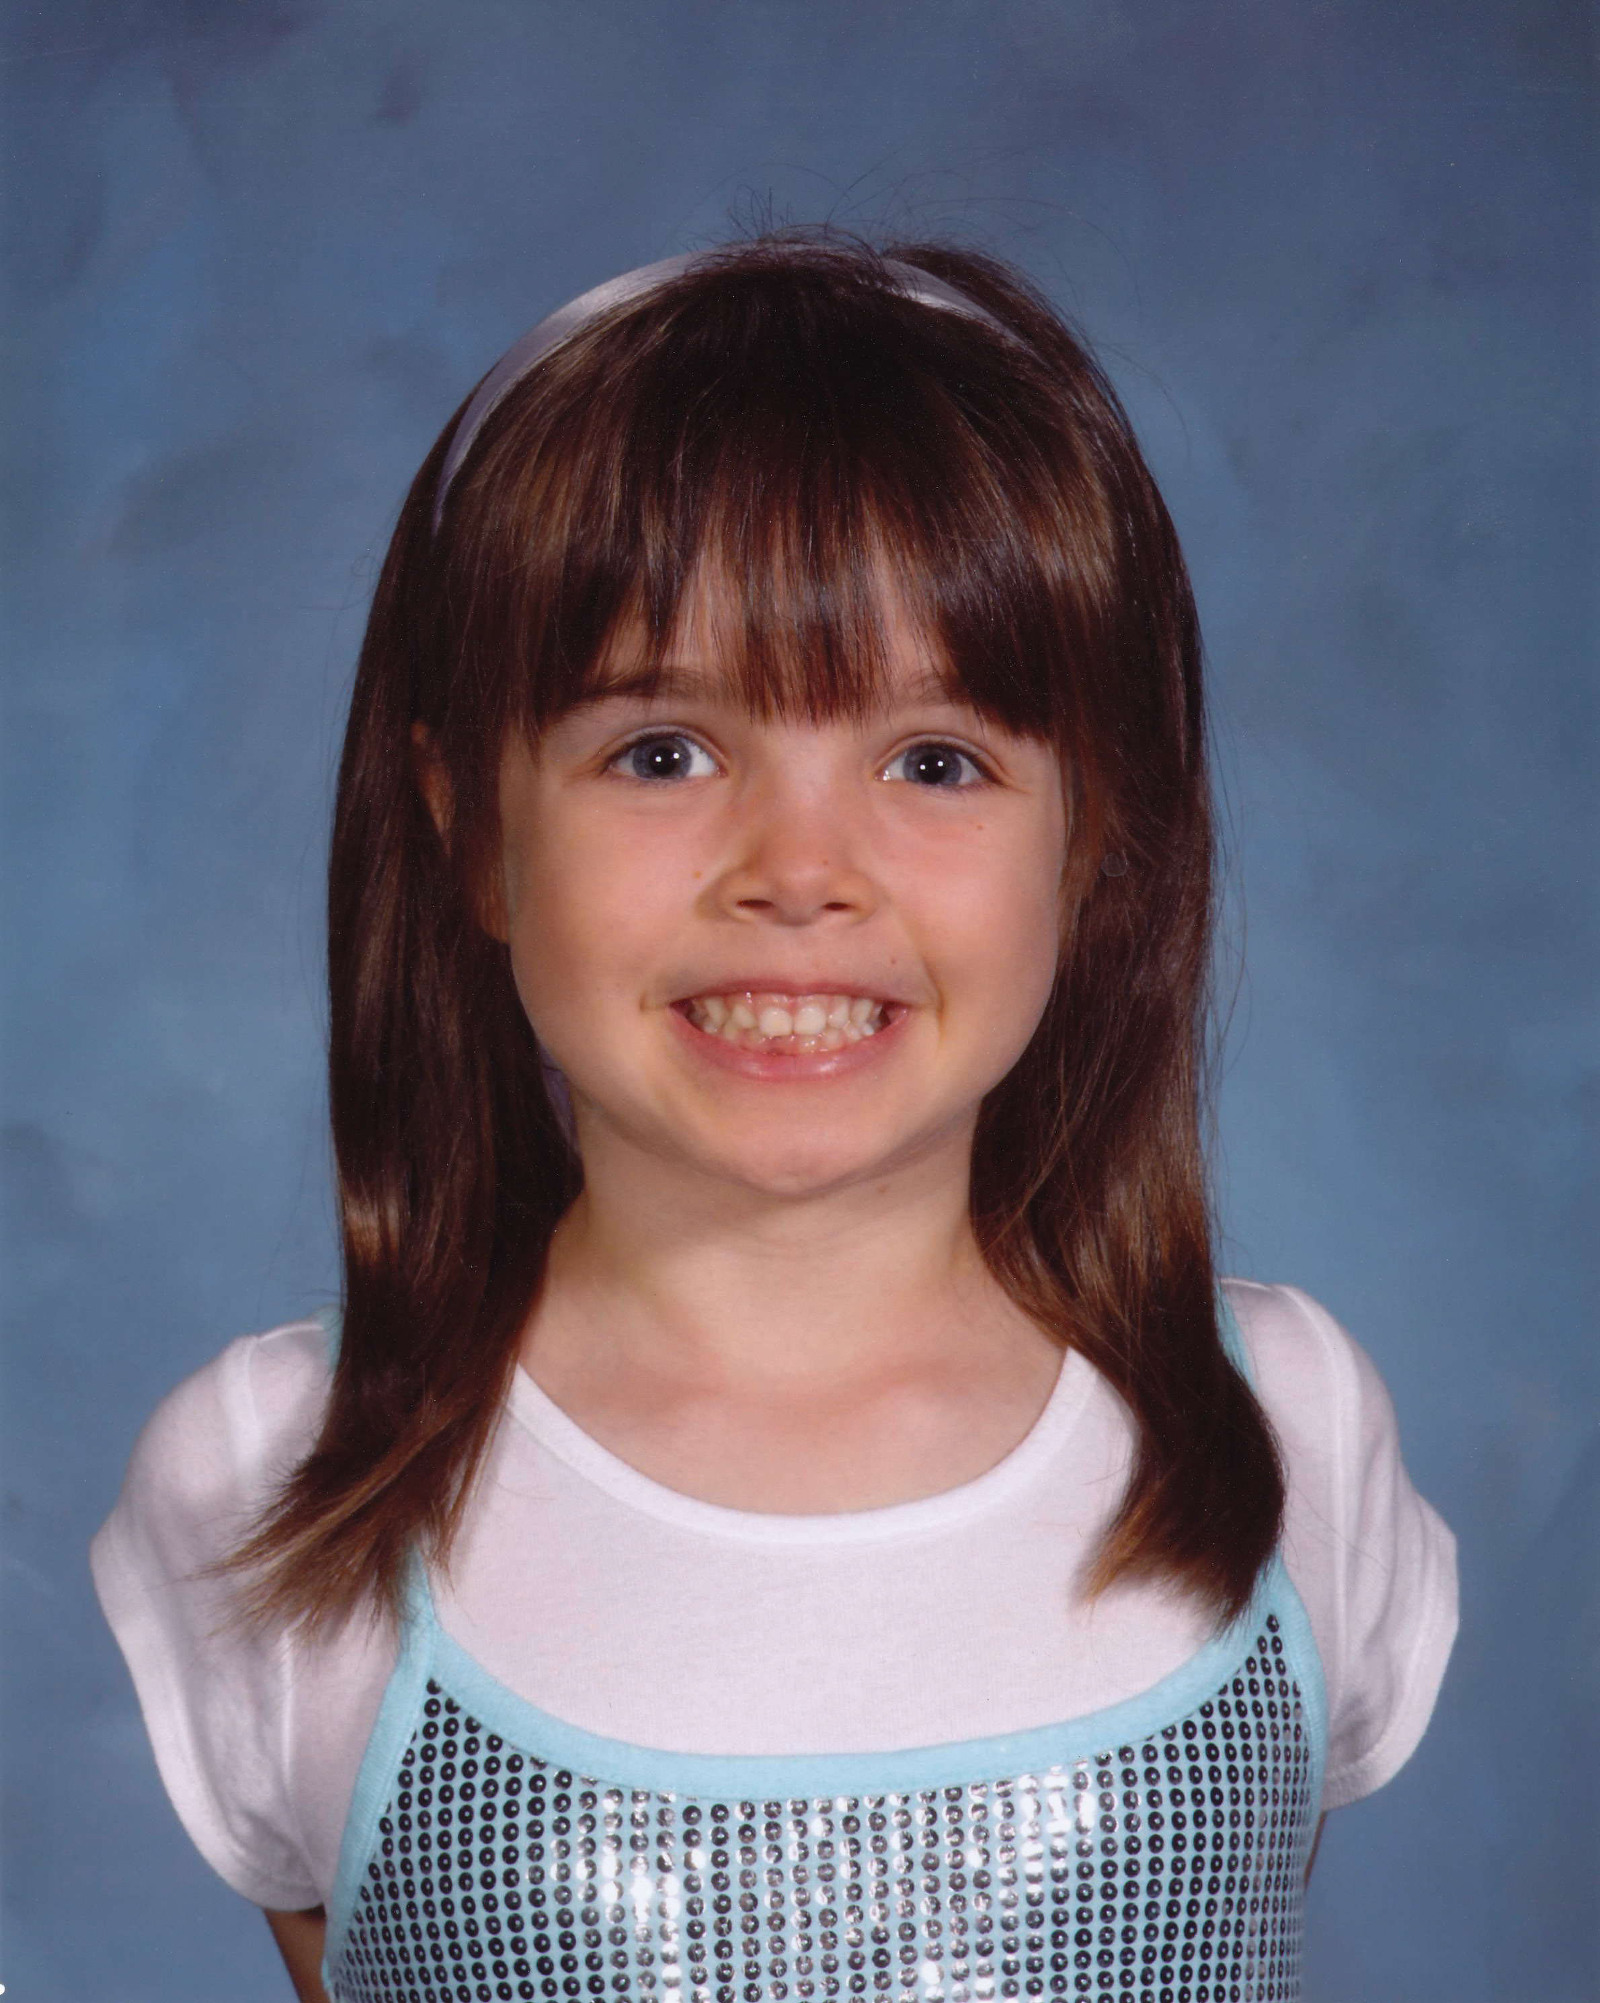 Here’s my little Kendall in her 1st grade school picture. 